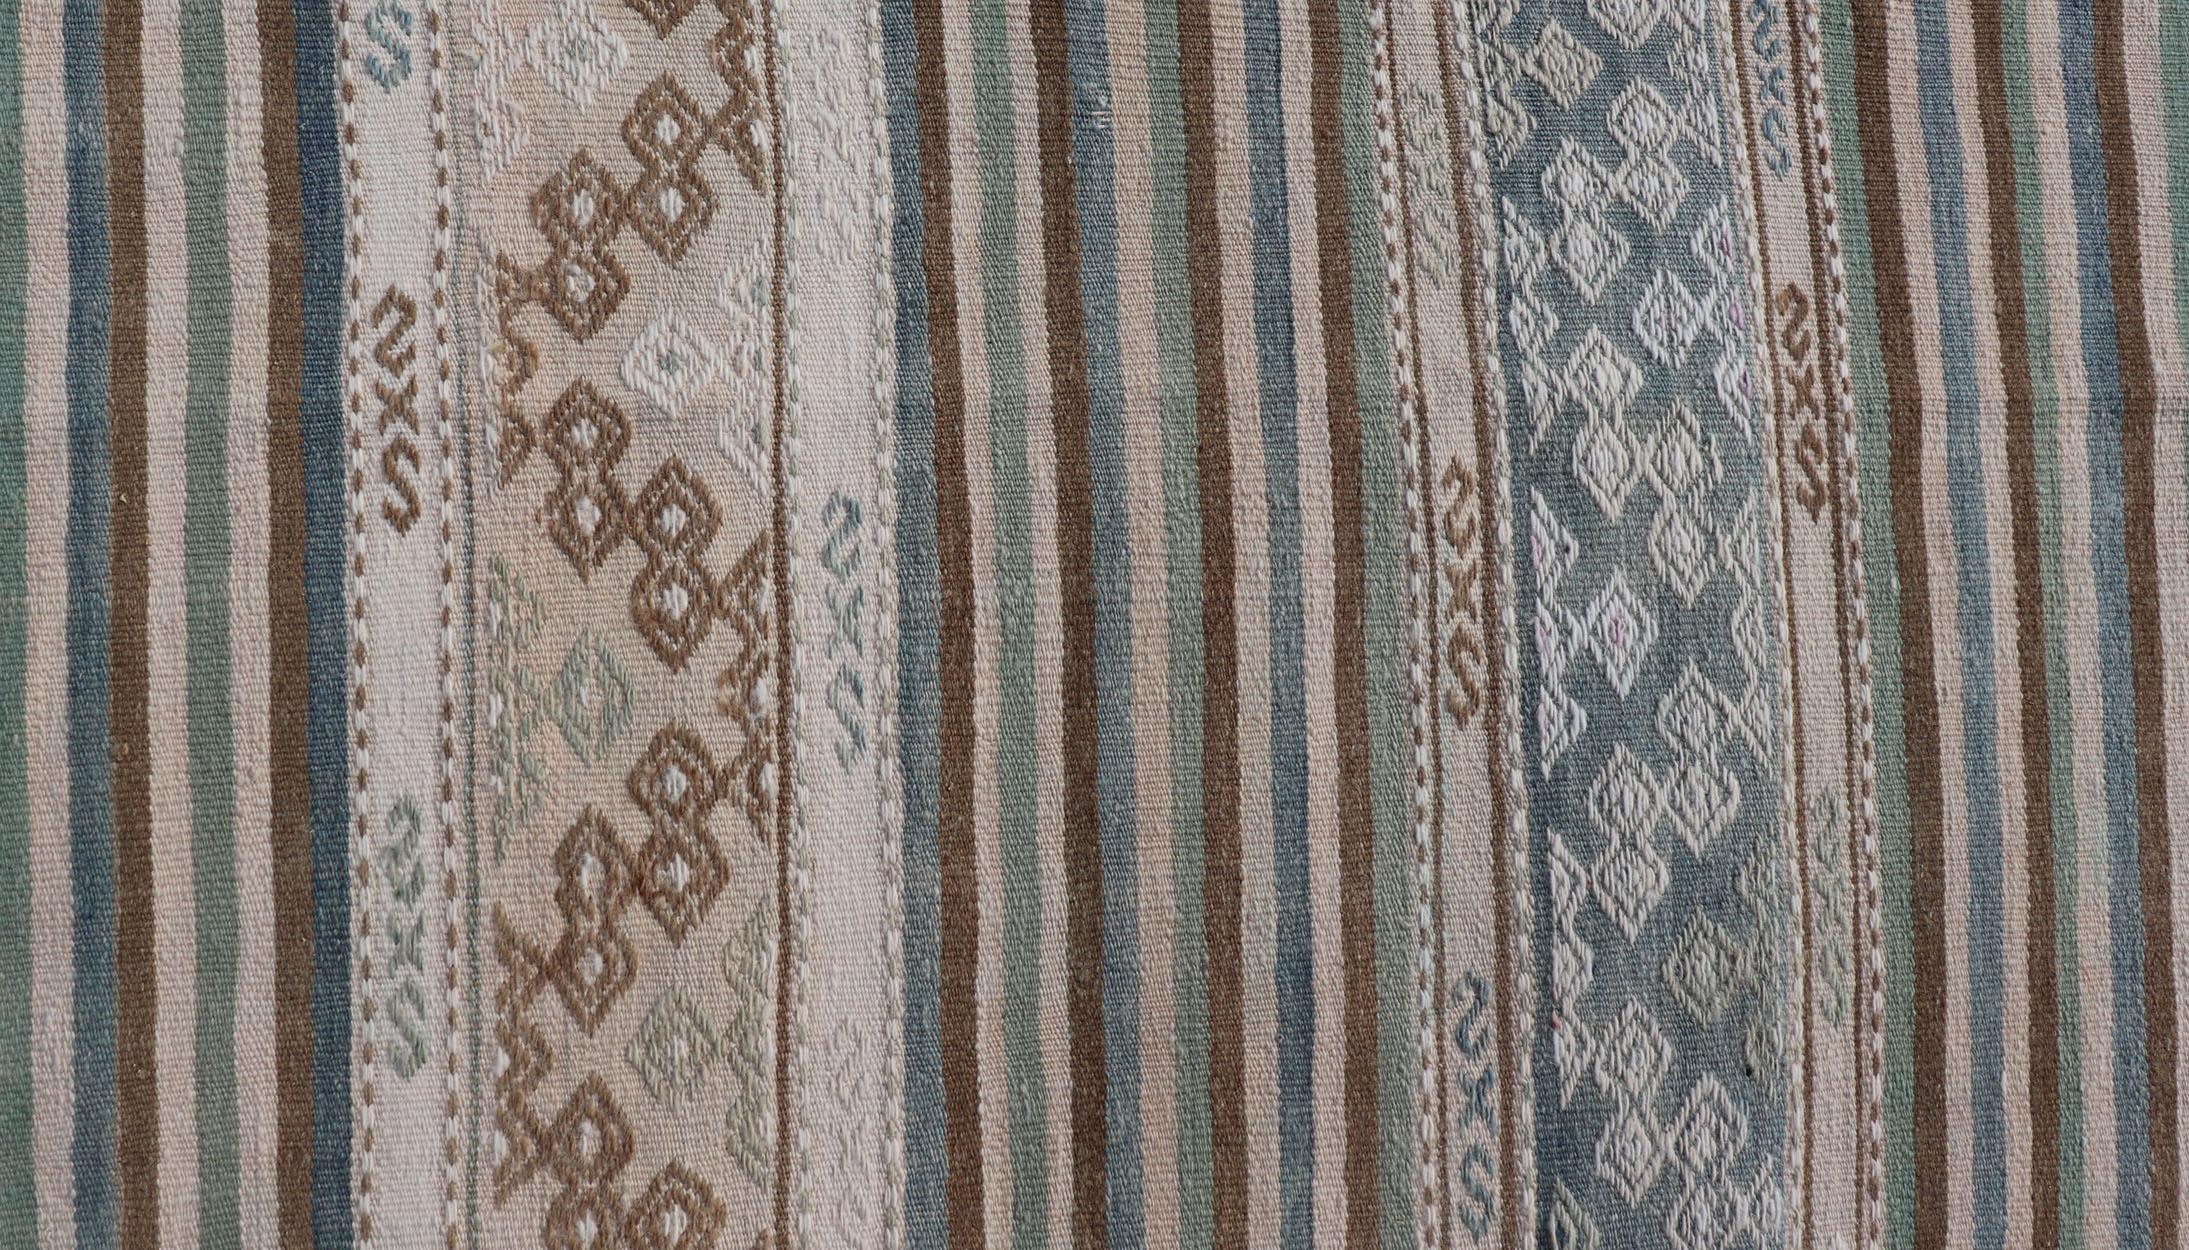 Turkish Flat-Weave Kilim with Stripes and Embroideries In Blue, Green, and Cream In Good Condition For Sale In Atlanta, GA